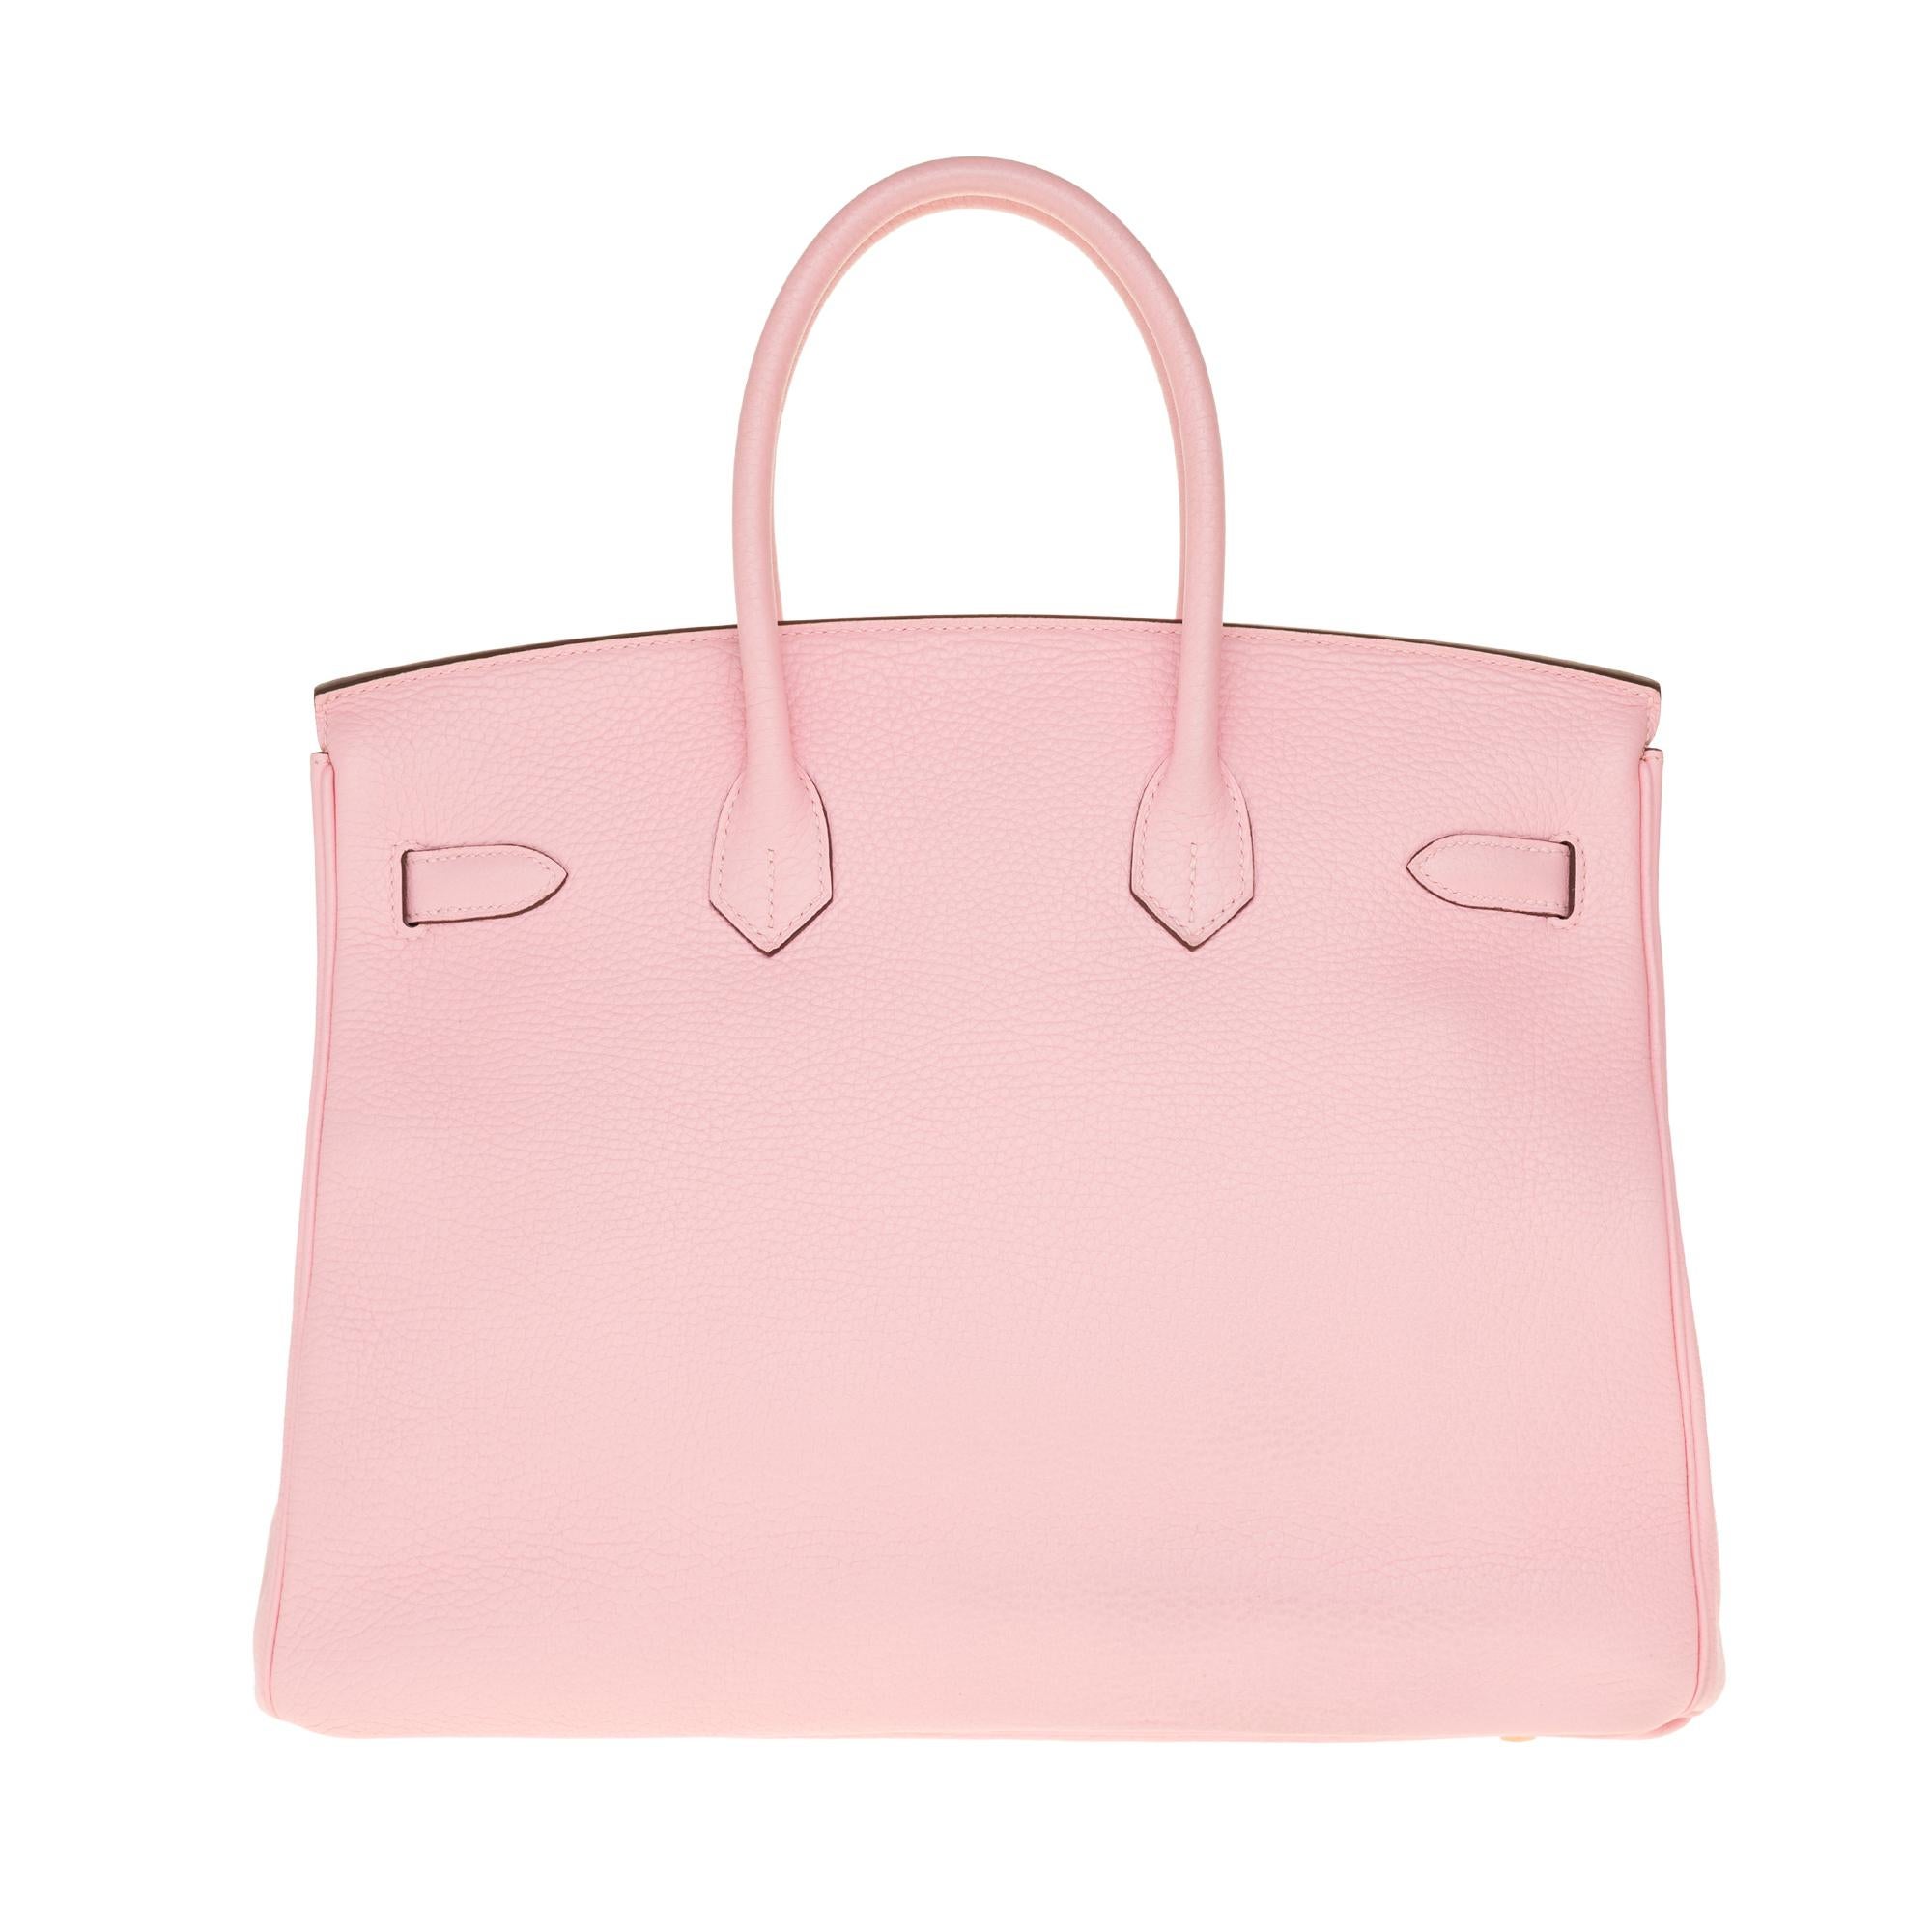 Stunning Hermes Birkin 35 cm handbag in Taurillon Clémence in one of the most coveted colors in the world: Sakura Rose , pink interior, gold plated metal hardware, double handle in pink leather allowing a hand held.

Closure by flap.
Lining in pink